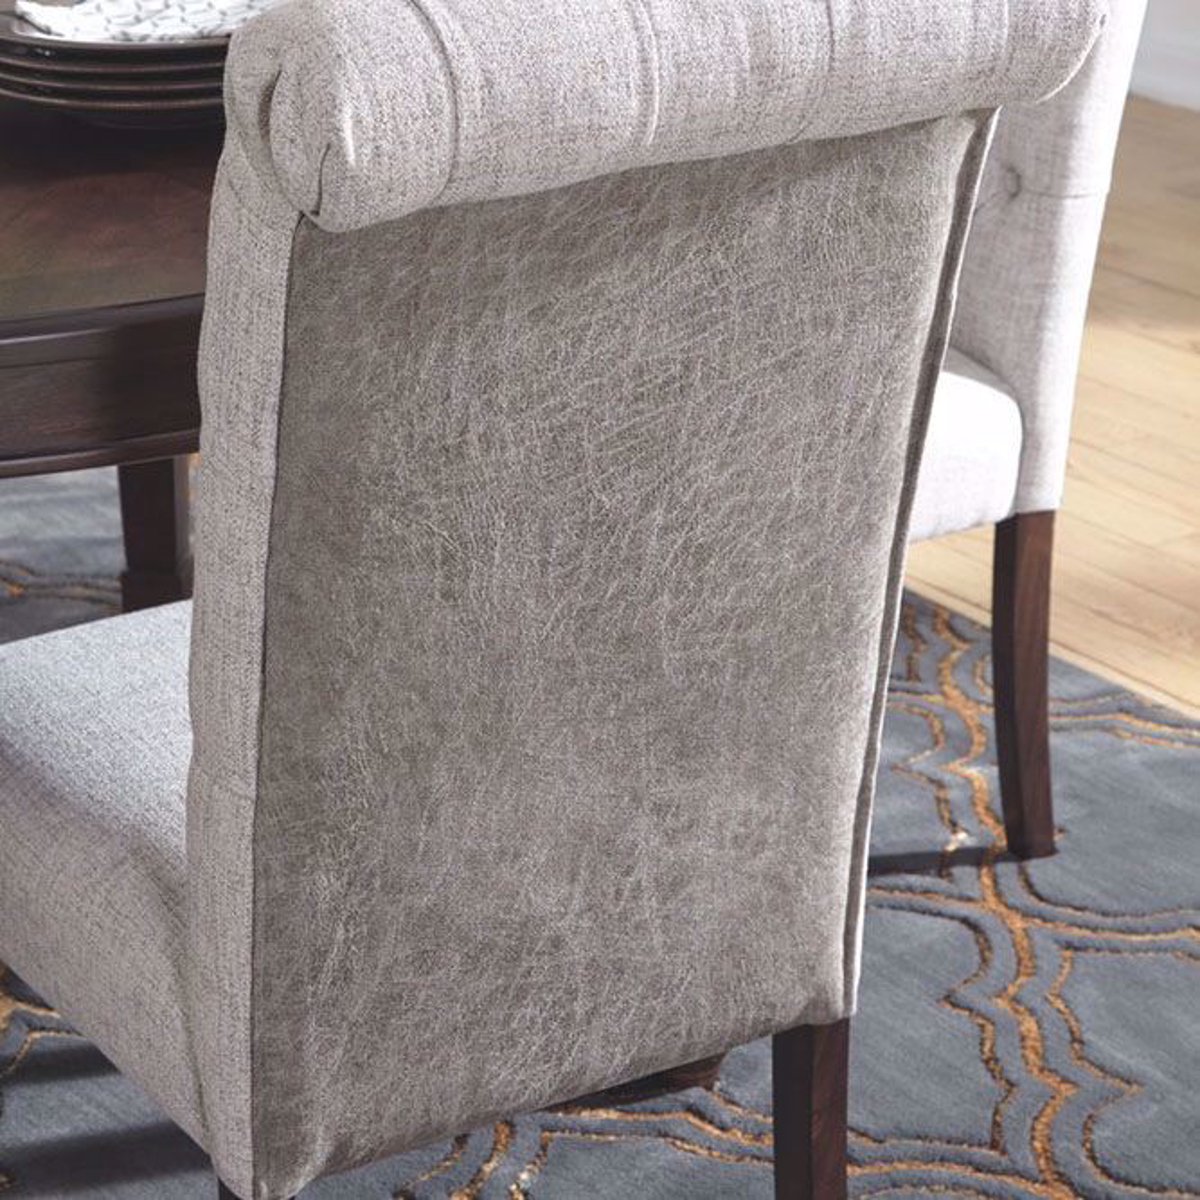 Picture of Arlington Upholstered Side Chair